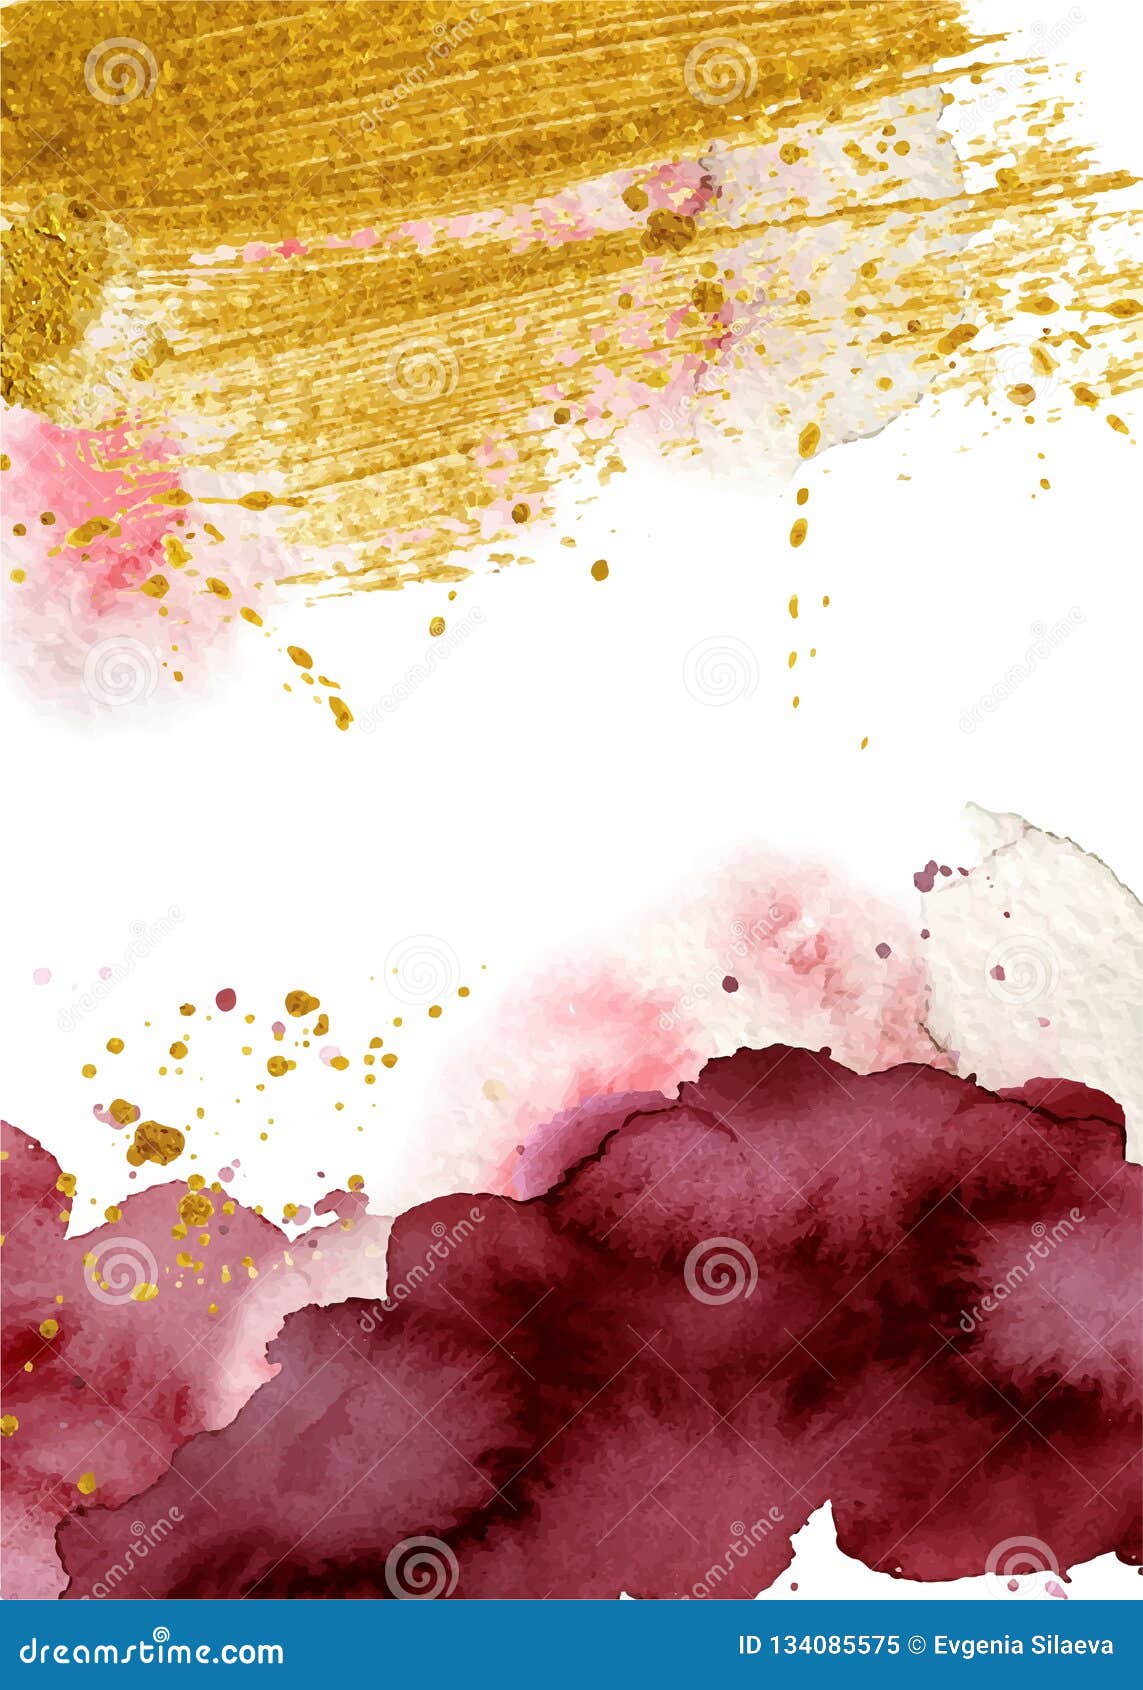 Watercolor Abstract Background, Hand Drawn Watercolour Burgundy and Gold  Texture Stock Vector - Illustration of backdrop, card: 134085575